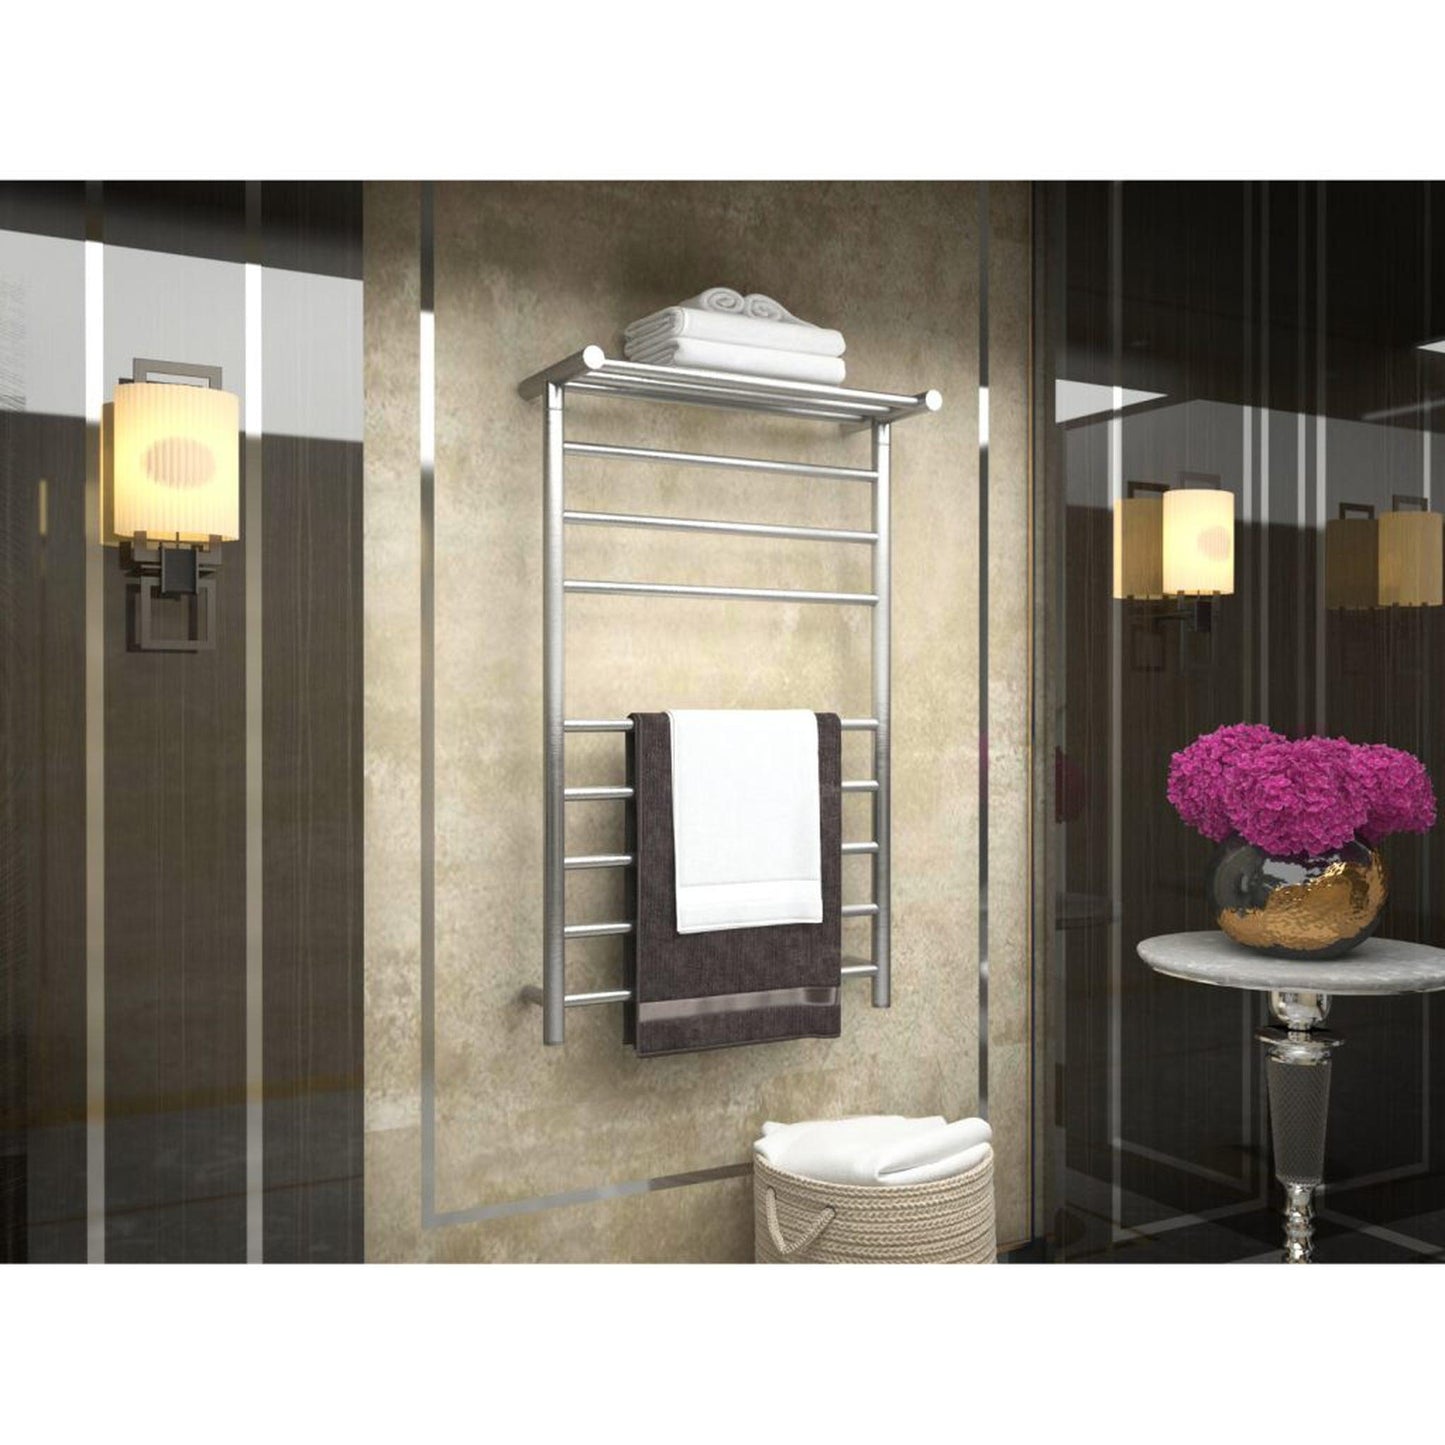 ANZZI Eve Series 8-Bar Stainless Steel Wall-Mounted Electric Towel Warmer Rack With Top Shelf in Brushed Nickel Finish